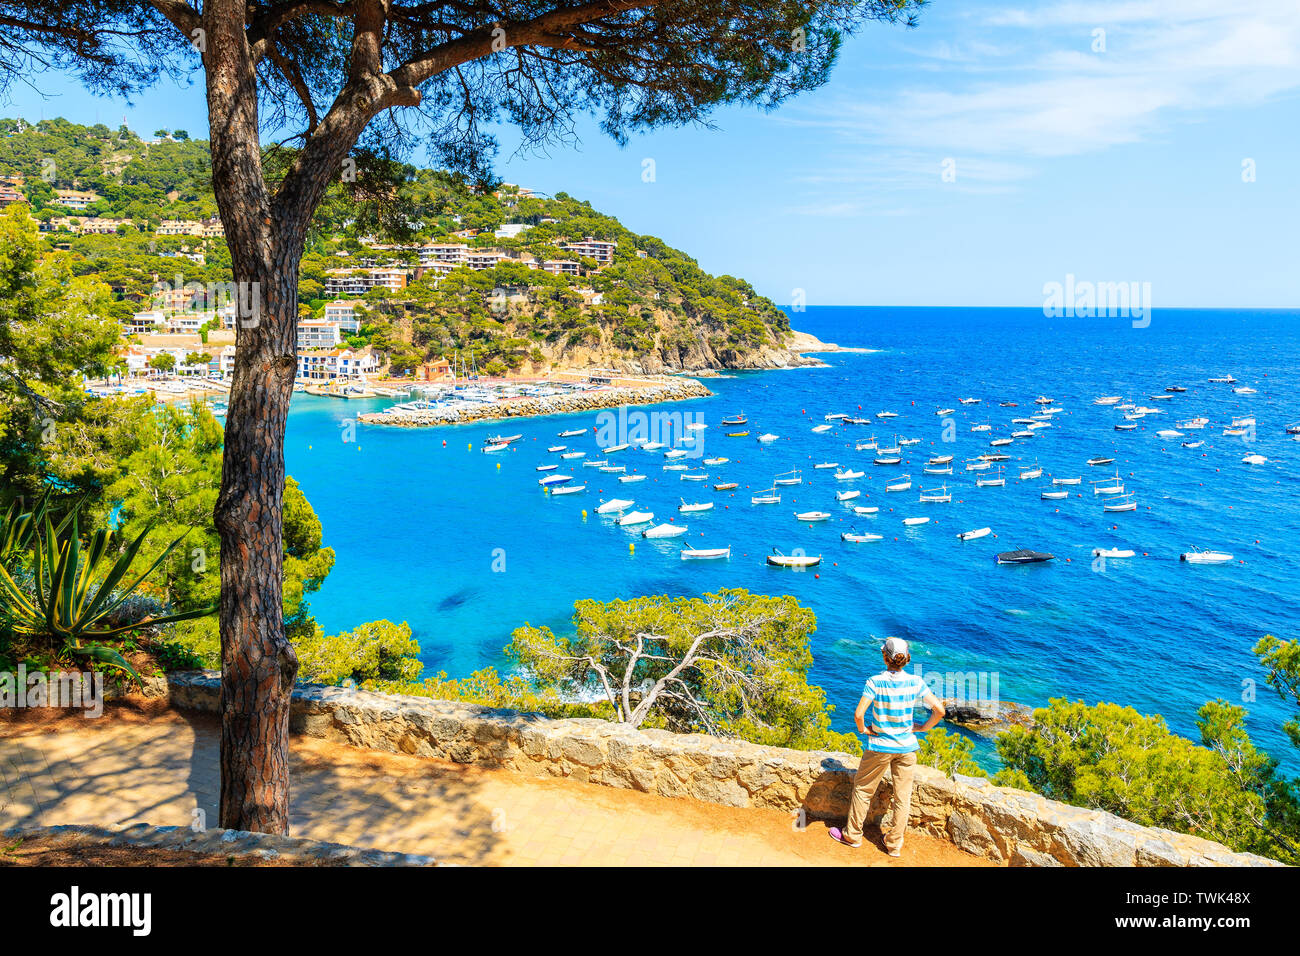 Young woman tourist standing on viewpoint over beautiful bay with boats on sea near Llafranc village, Costa Brava, Spain Stock Photo